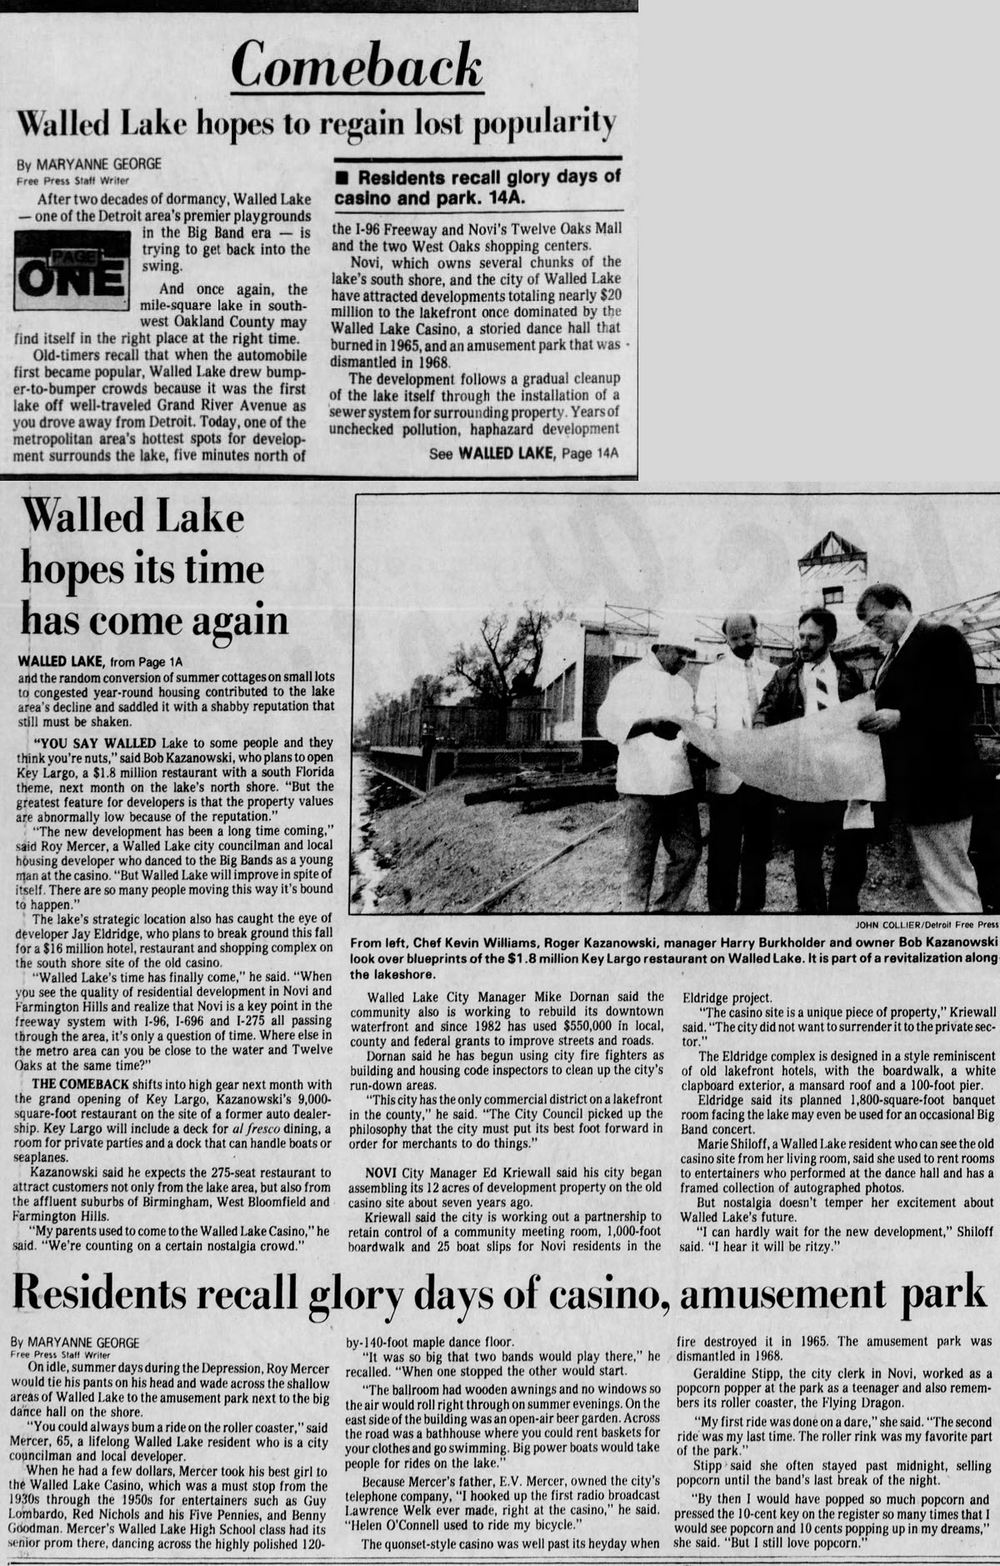 Dick Morris Chevrolet (Walled Lake Chrysler Plymouth) - Apr 27 1987 Good Article On This Place And Old Walled Lake